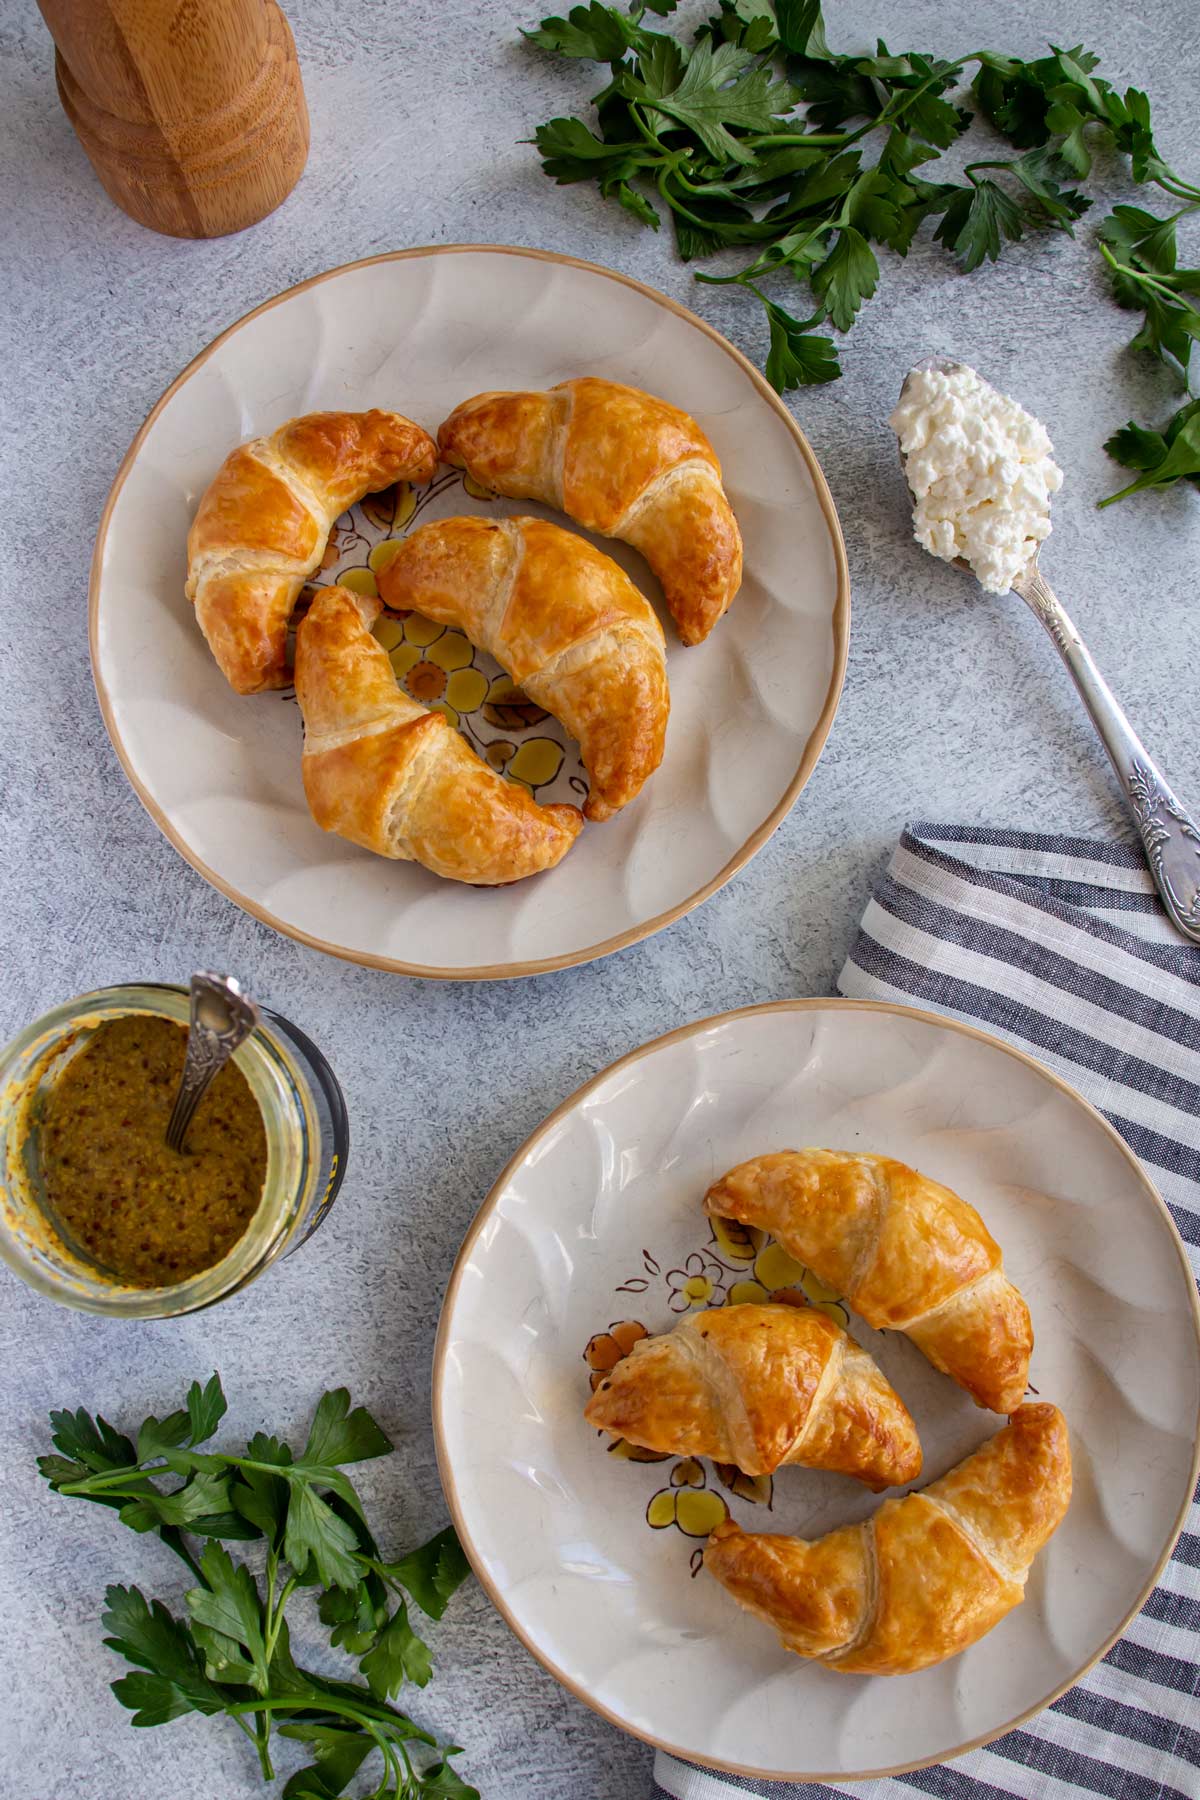 Two plates of ham croissants, parsley, a jar of mustard, and a spoon of quark cheese.